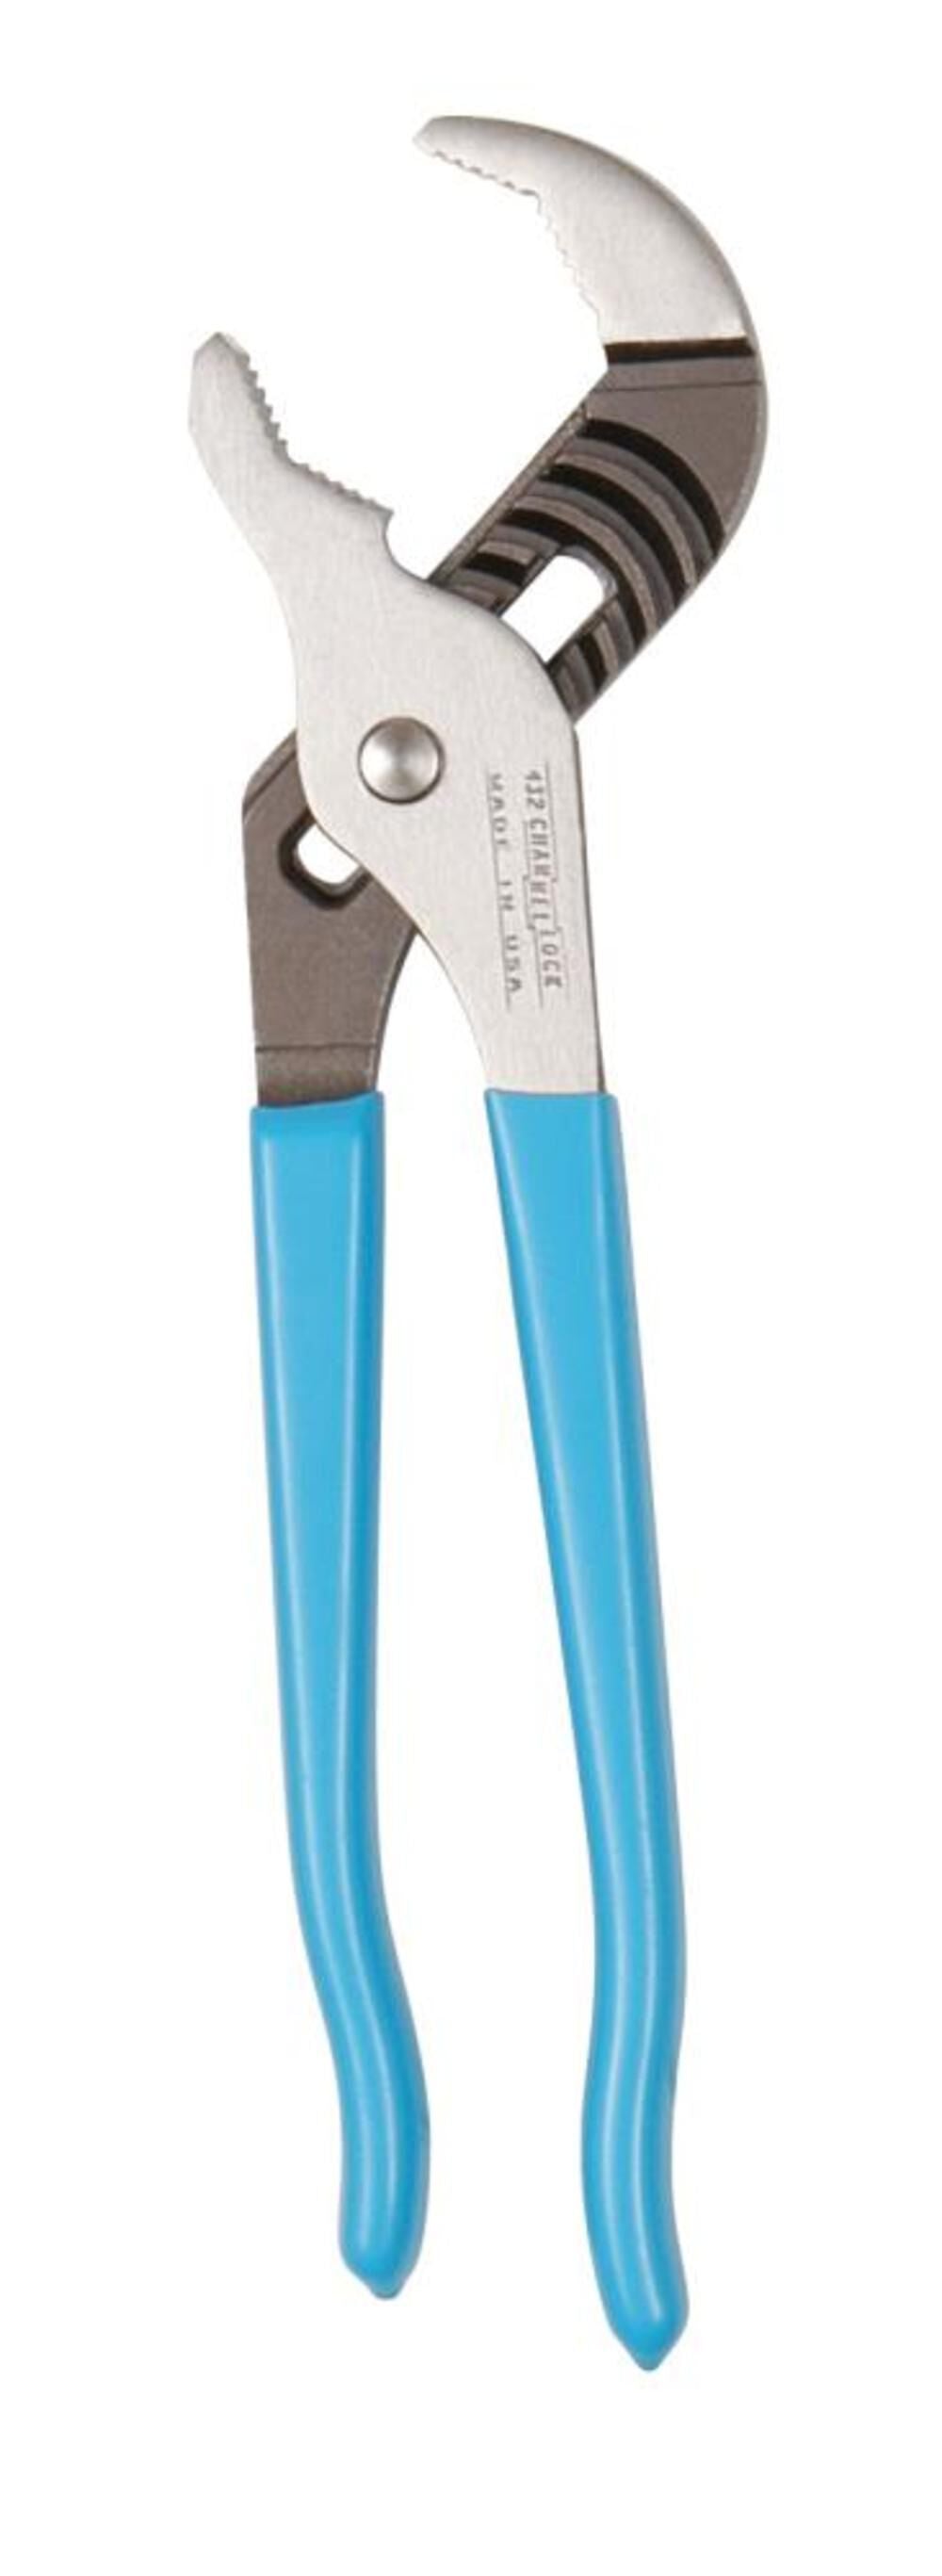 10 In. V-jaws Tongue & Groove Plier 432